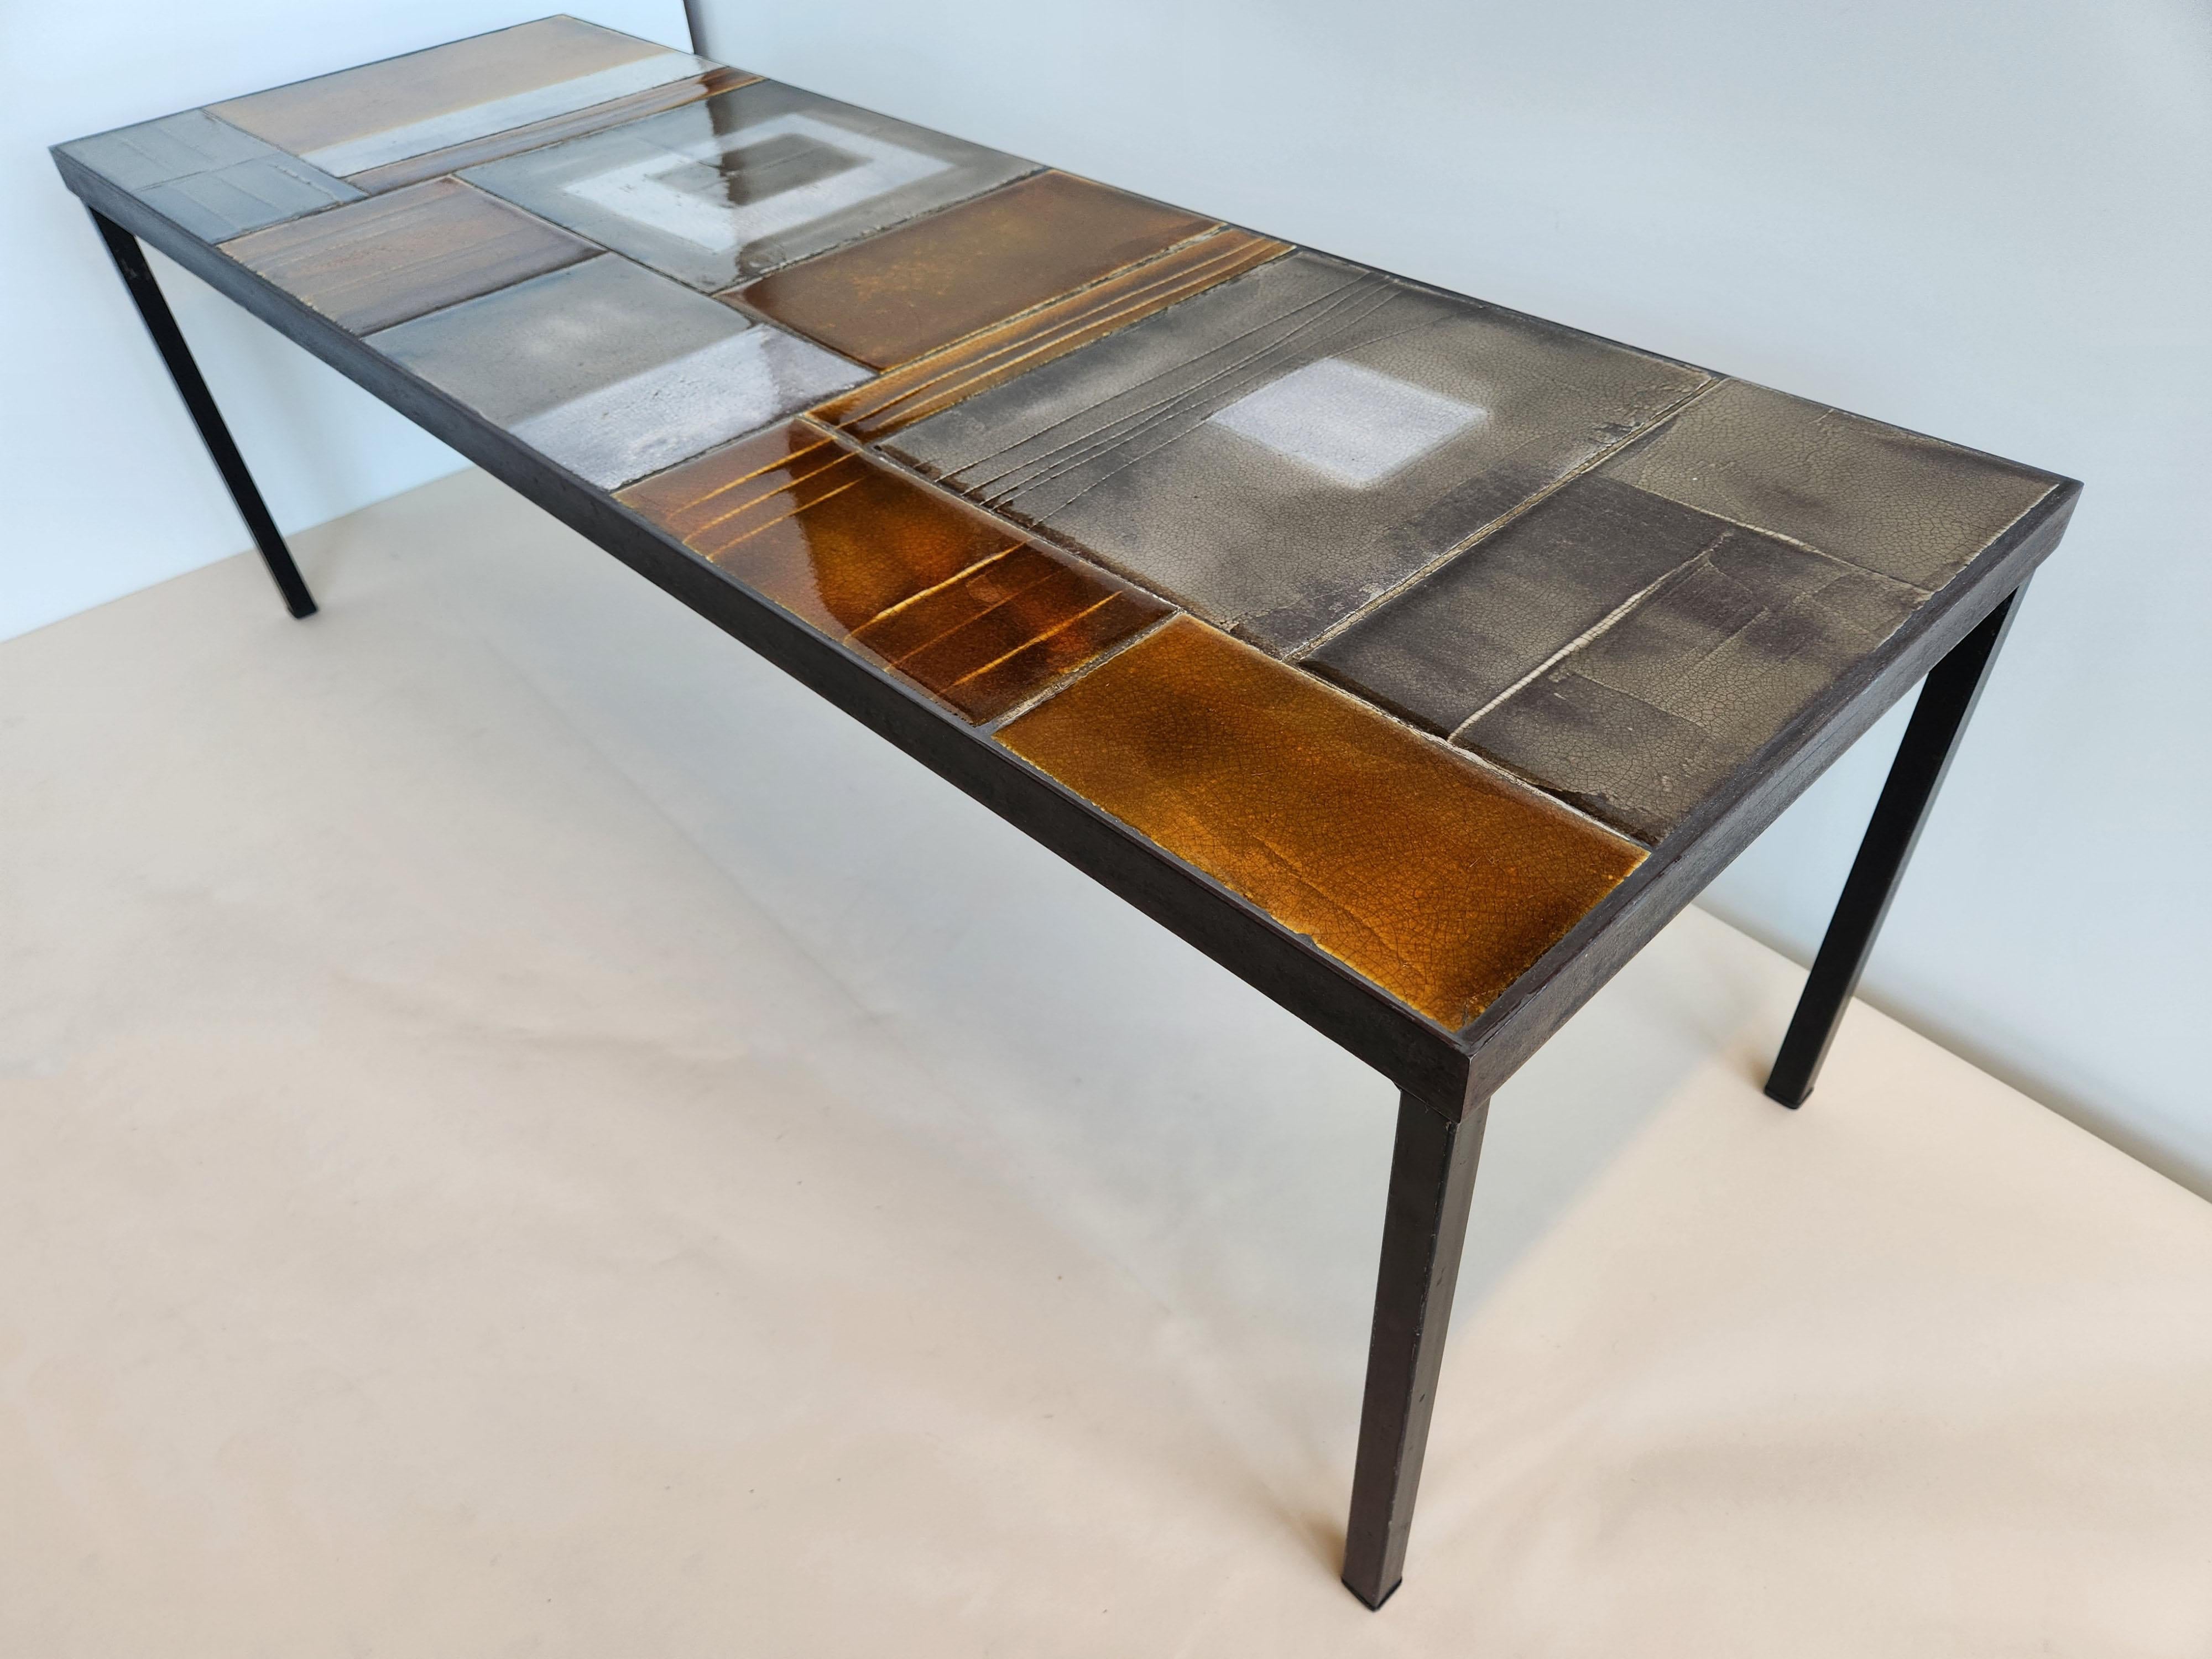 Roger Capron - Stunning Ceramic Coffee Table with Lava Tiles, Metal Frame, 1970s For Sale 5